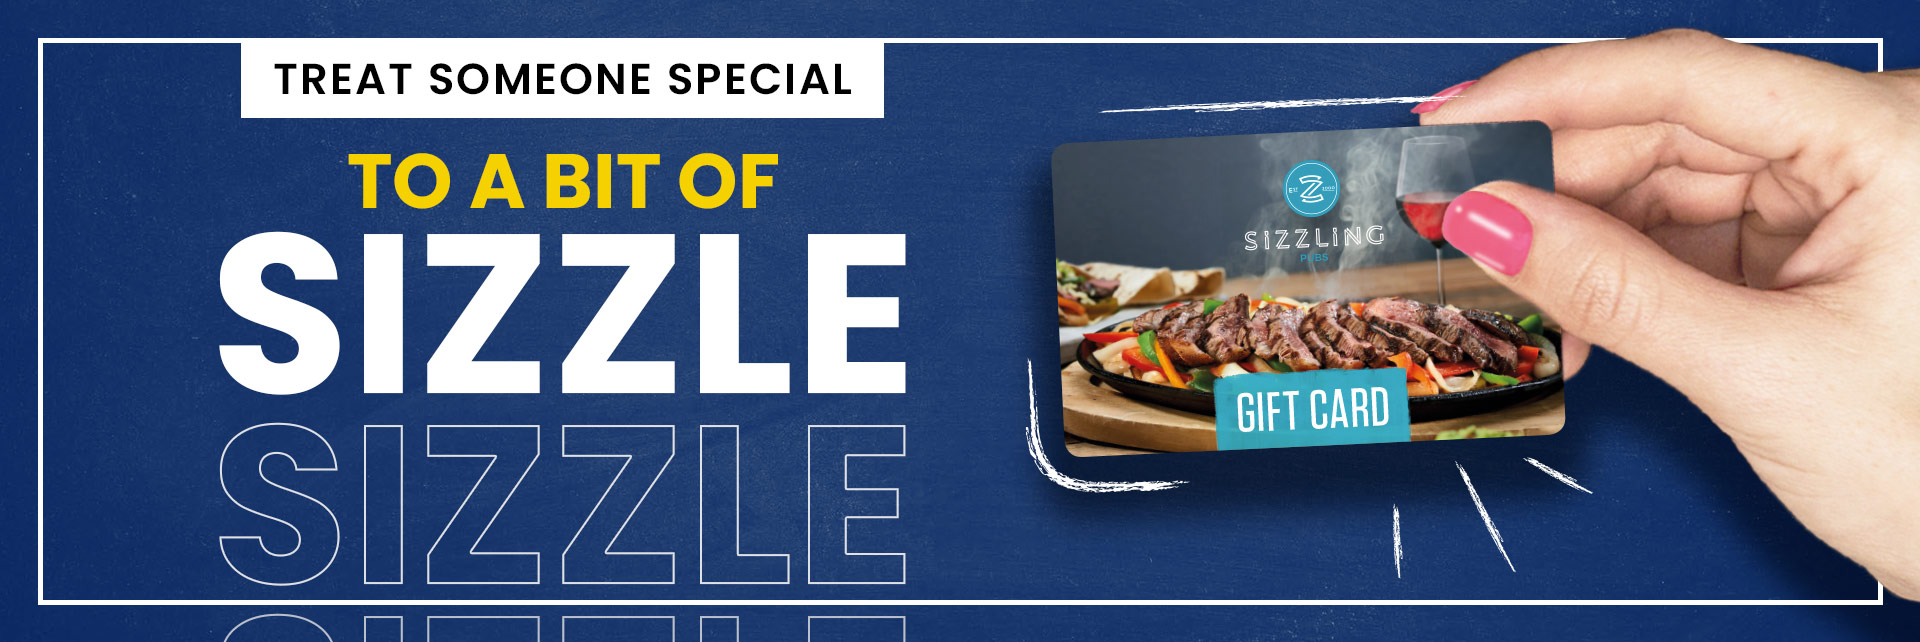 Sizzling Pubs Gift Card at The Rose & Crown, Wolverhampton in Wolverhampton